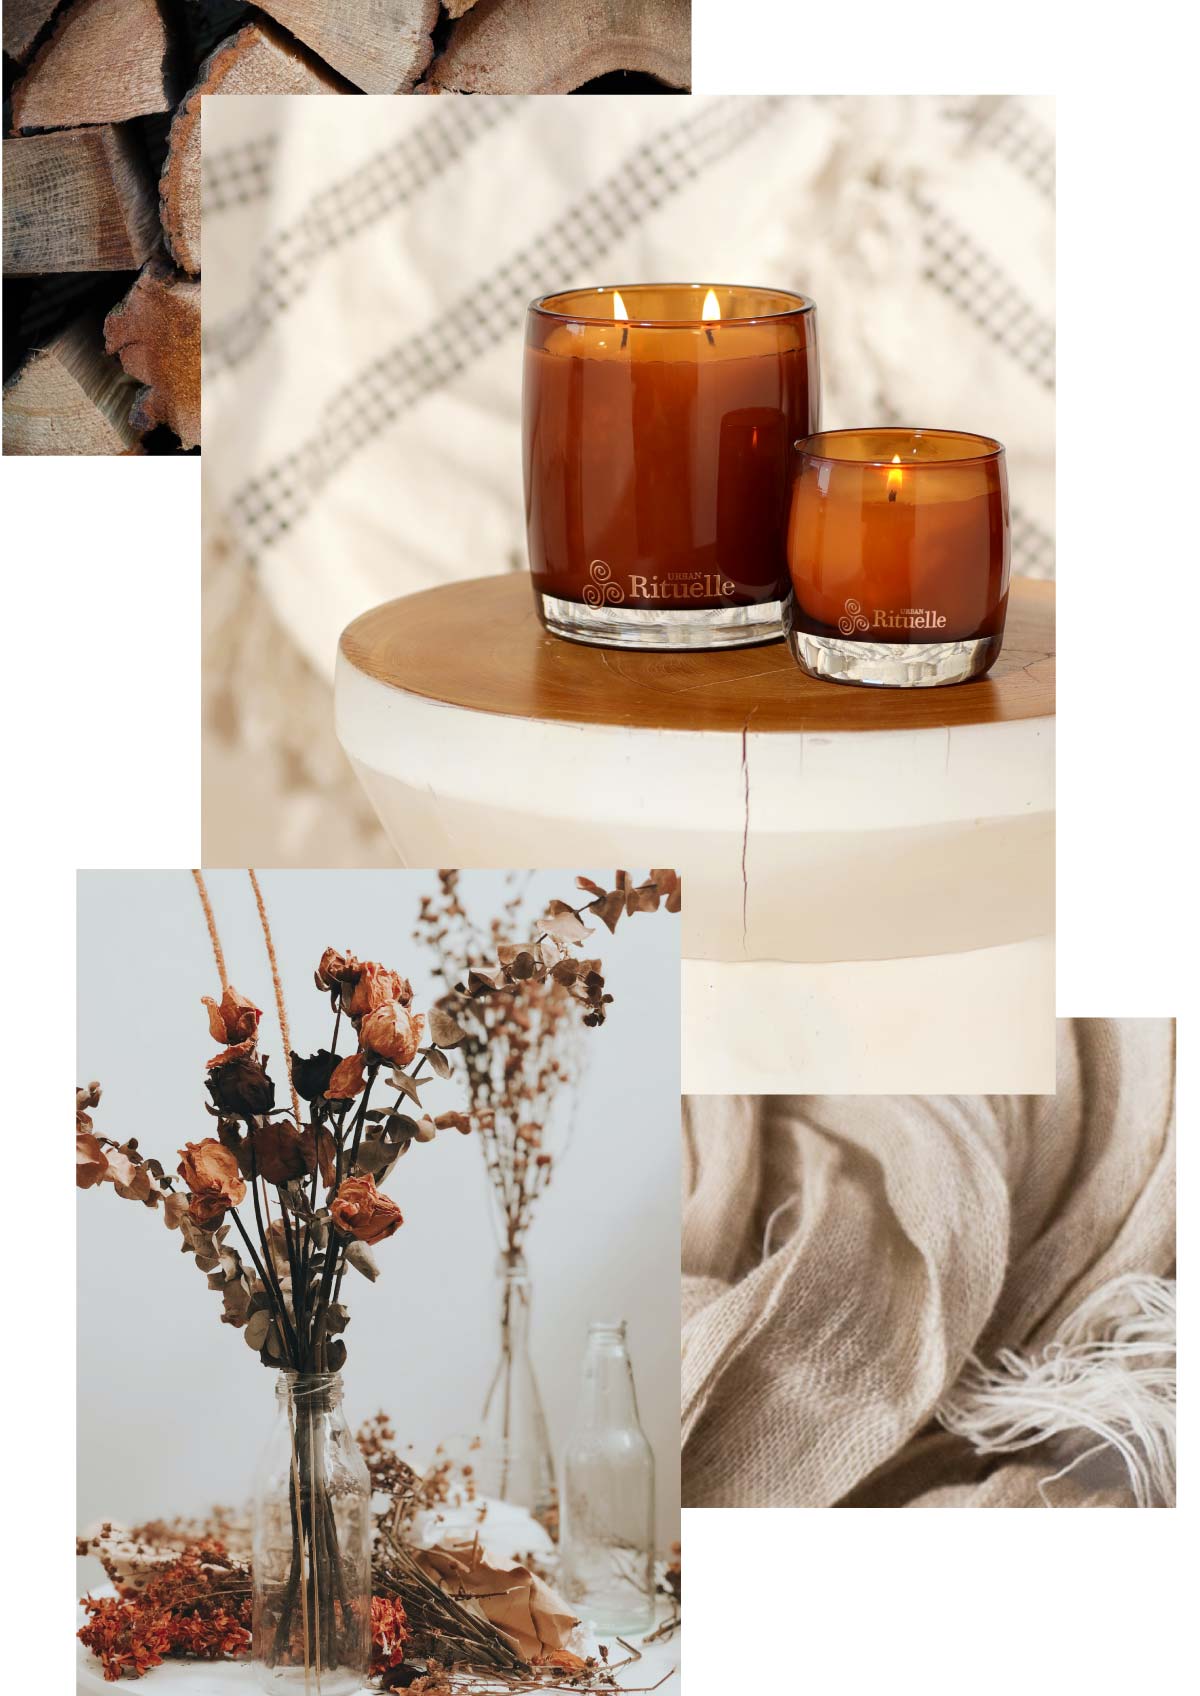 Winter + Candles = Pure Magic!